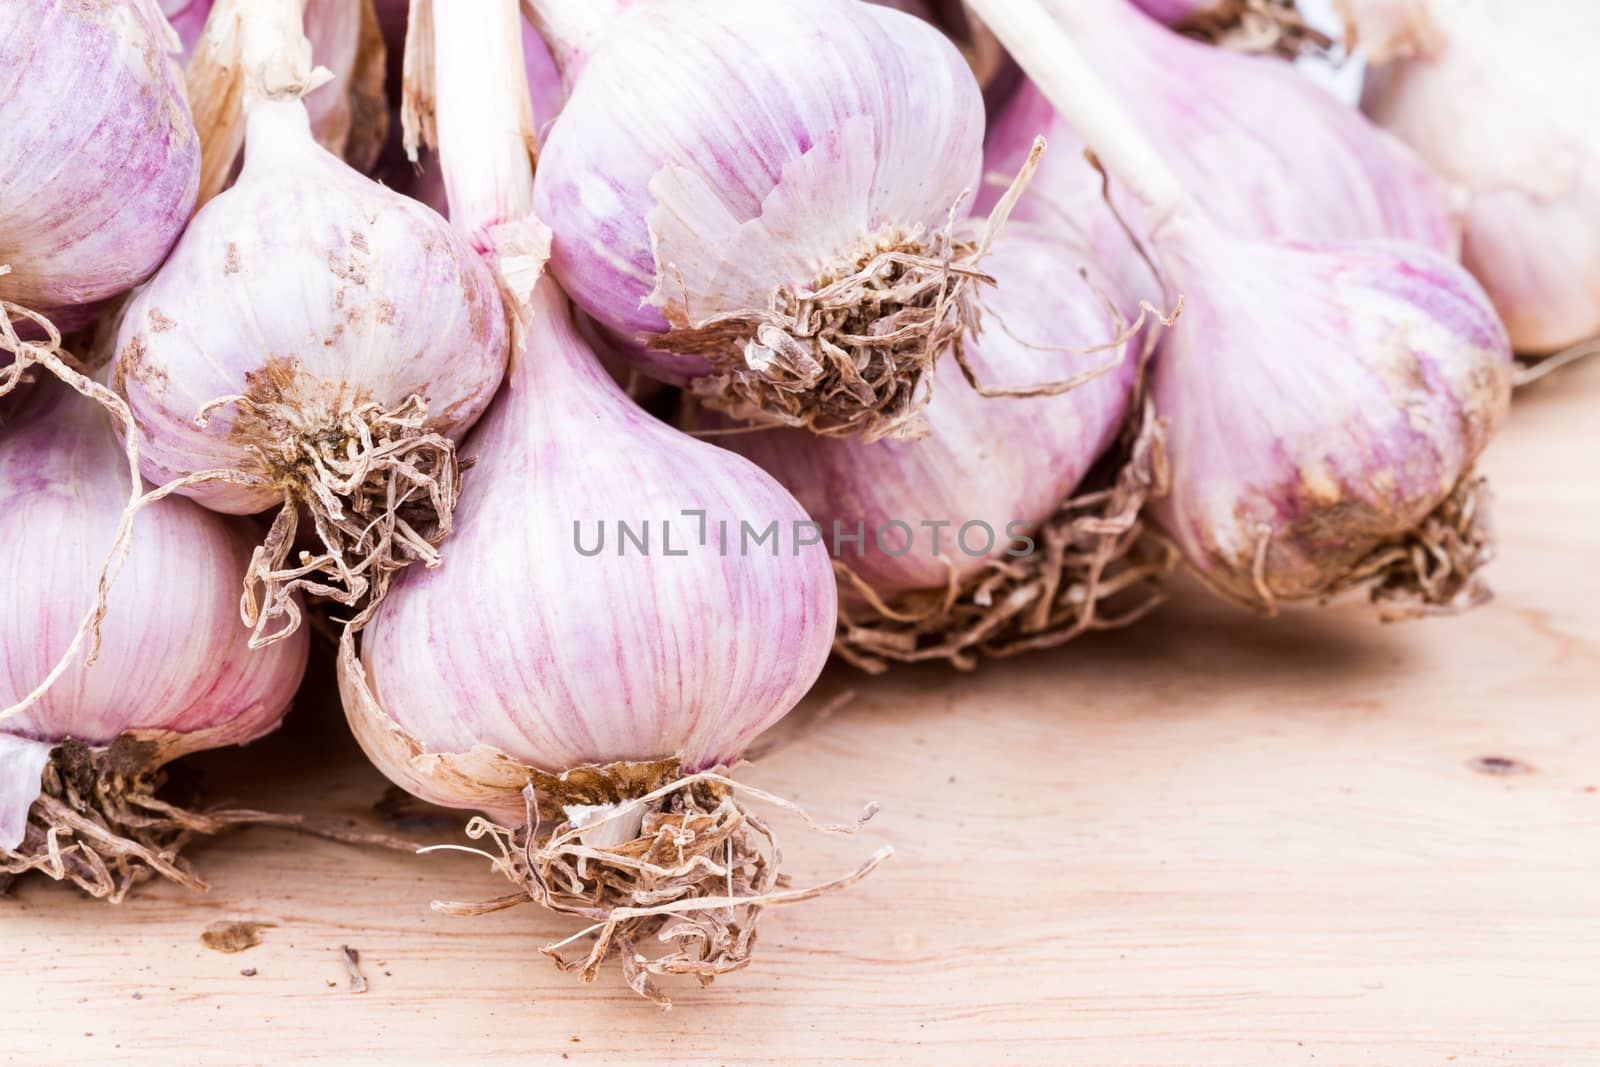 piles of garlic vegetable on wooden background